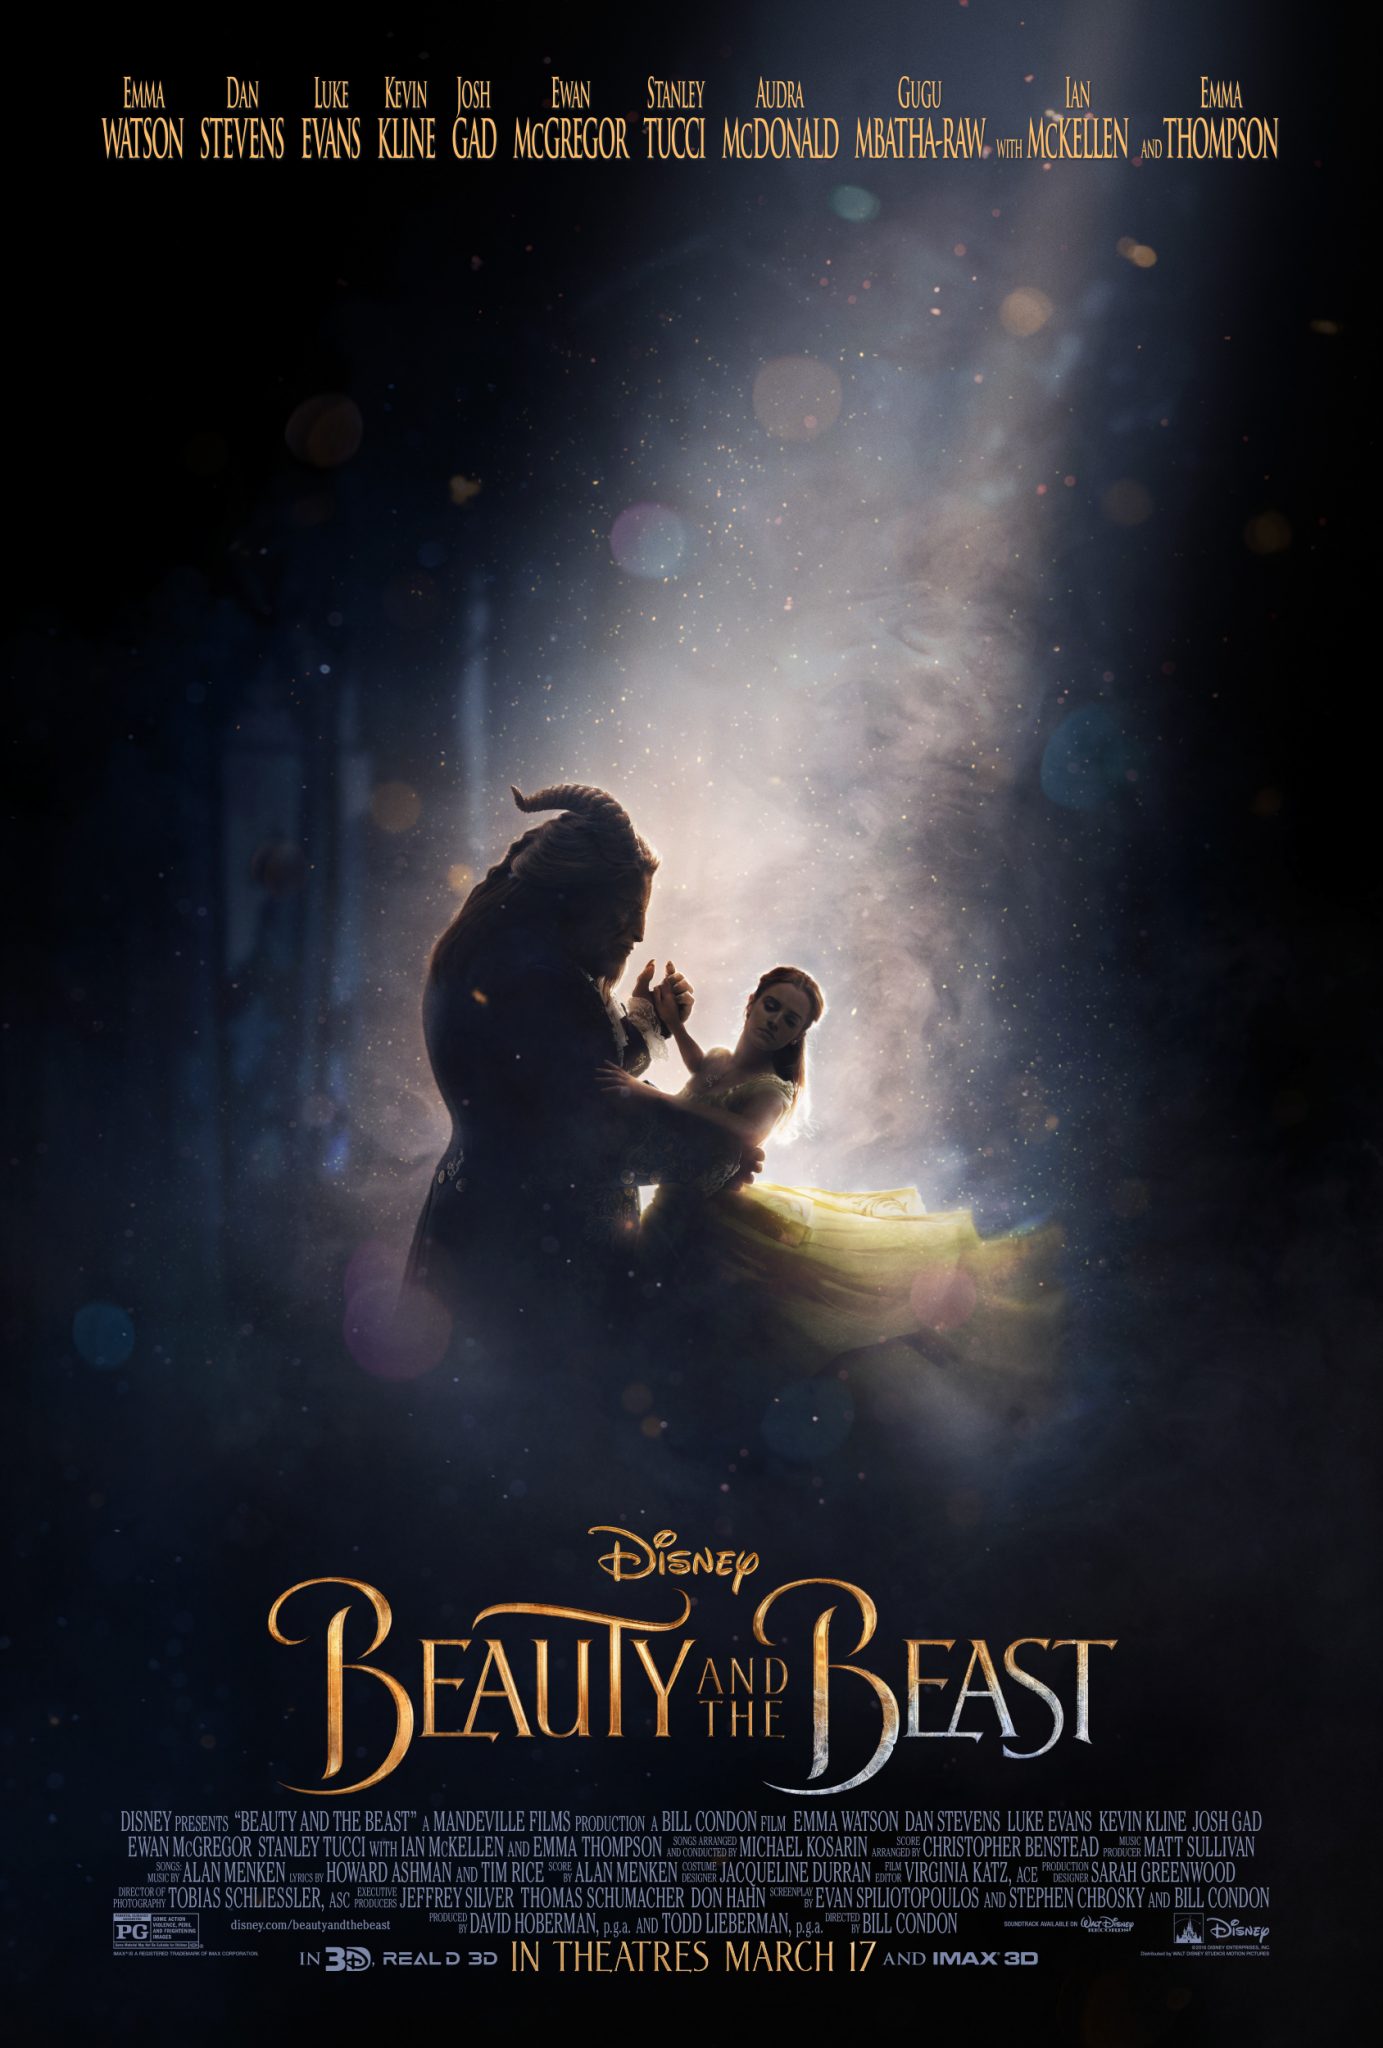 Disney Releases New Beauty and the Beast Poster